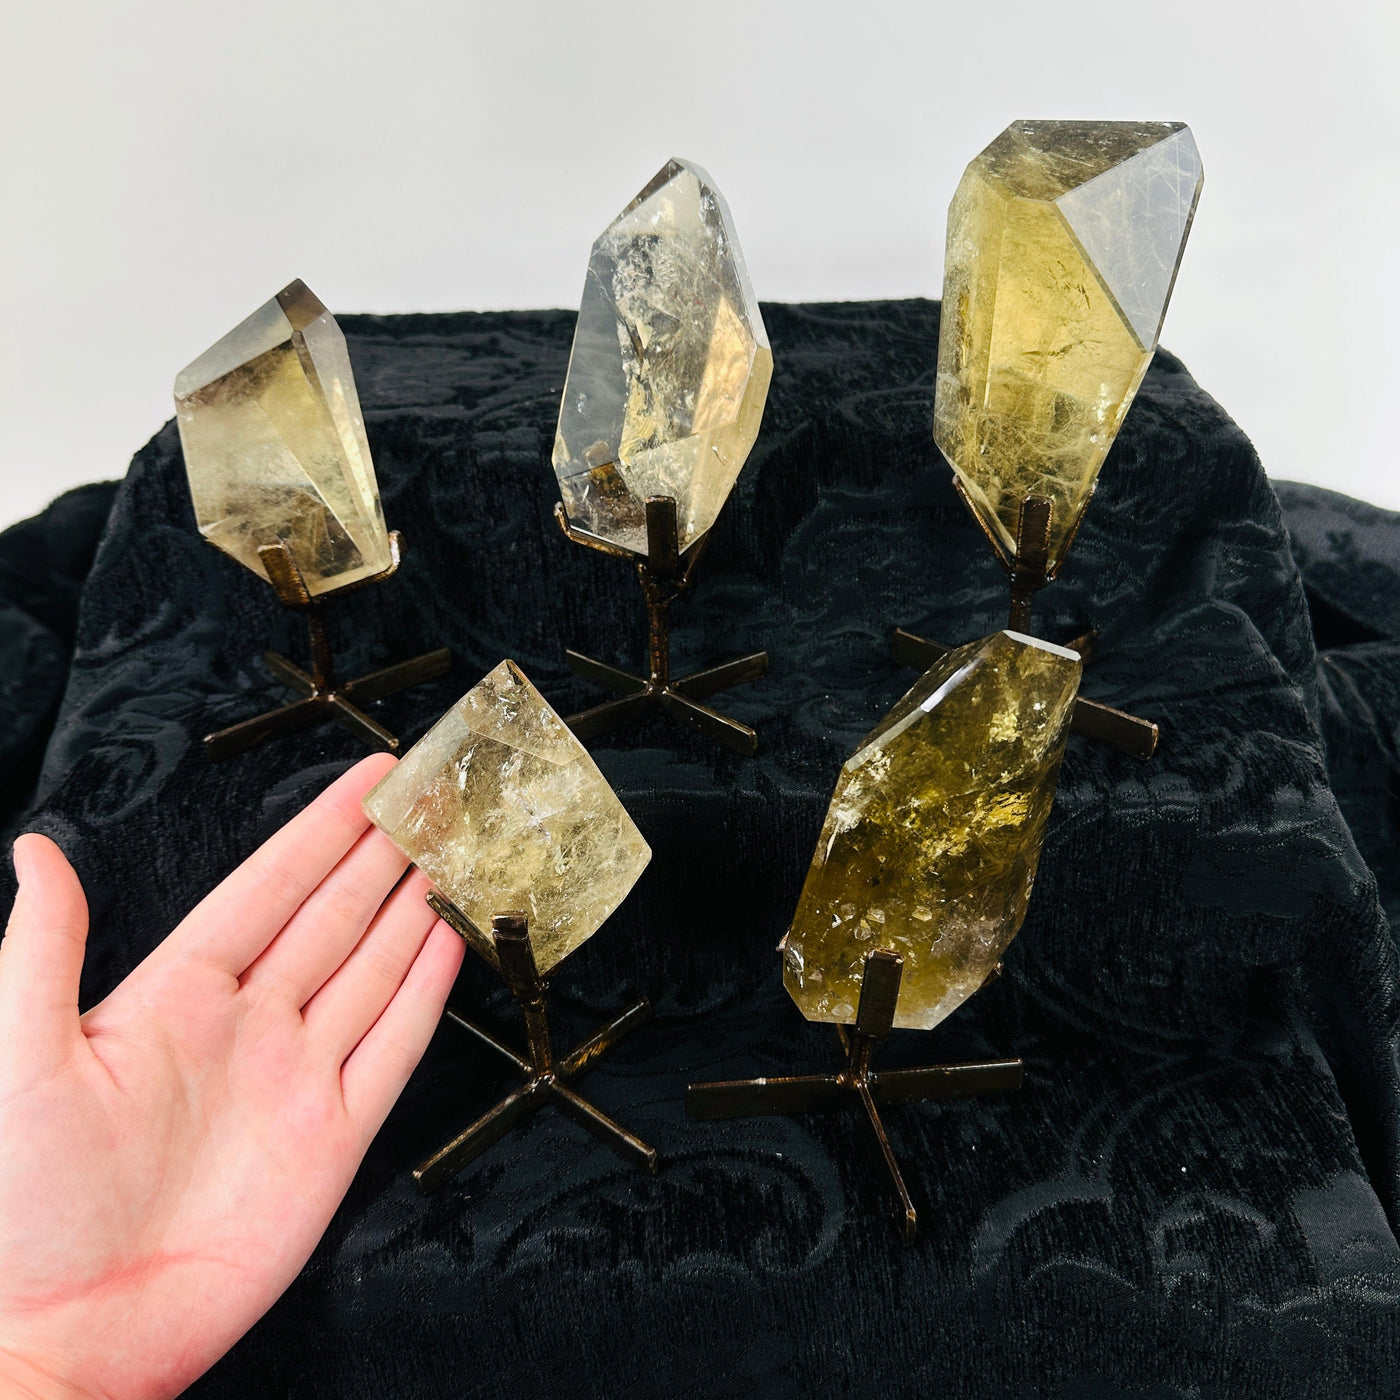 hand next to citrine on metal stand with others in the background